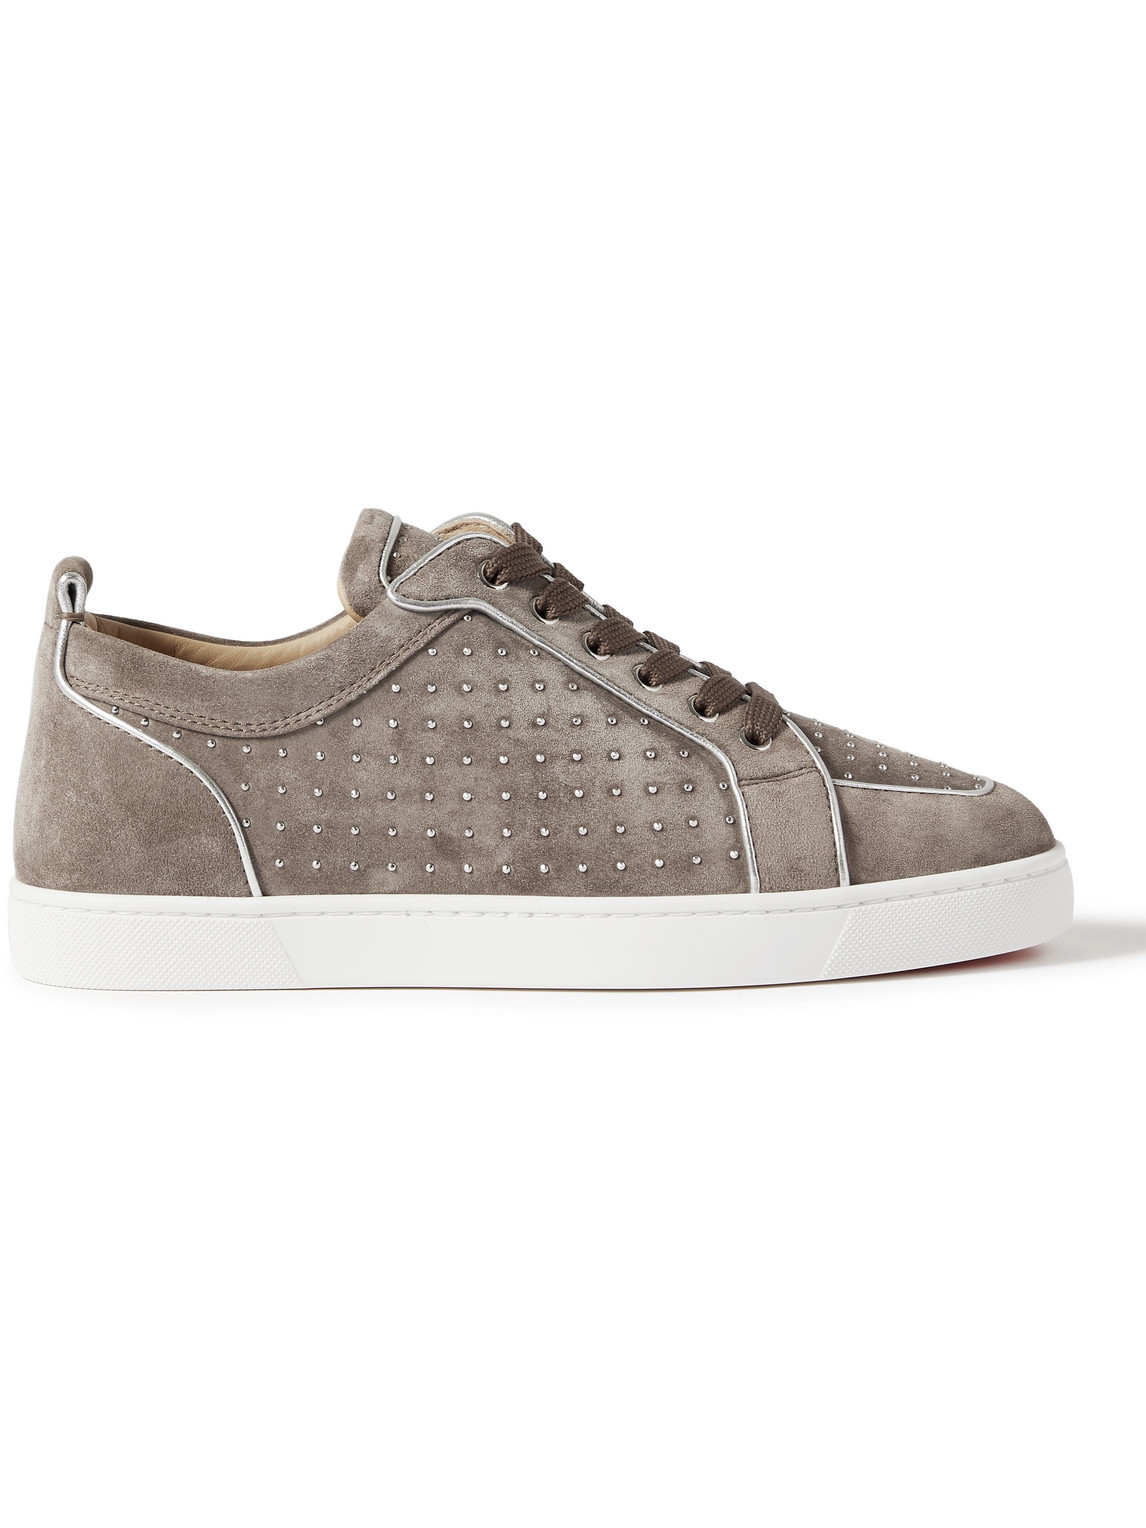 Rantulow Plume Studded Leather-Trimmed Suede Sneakers